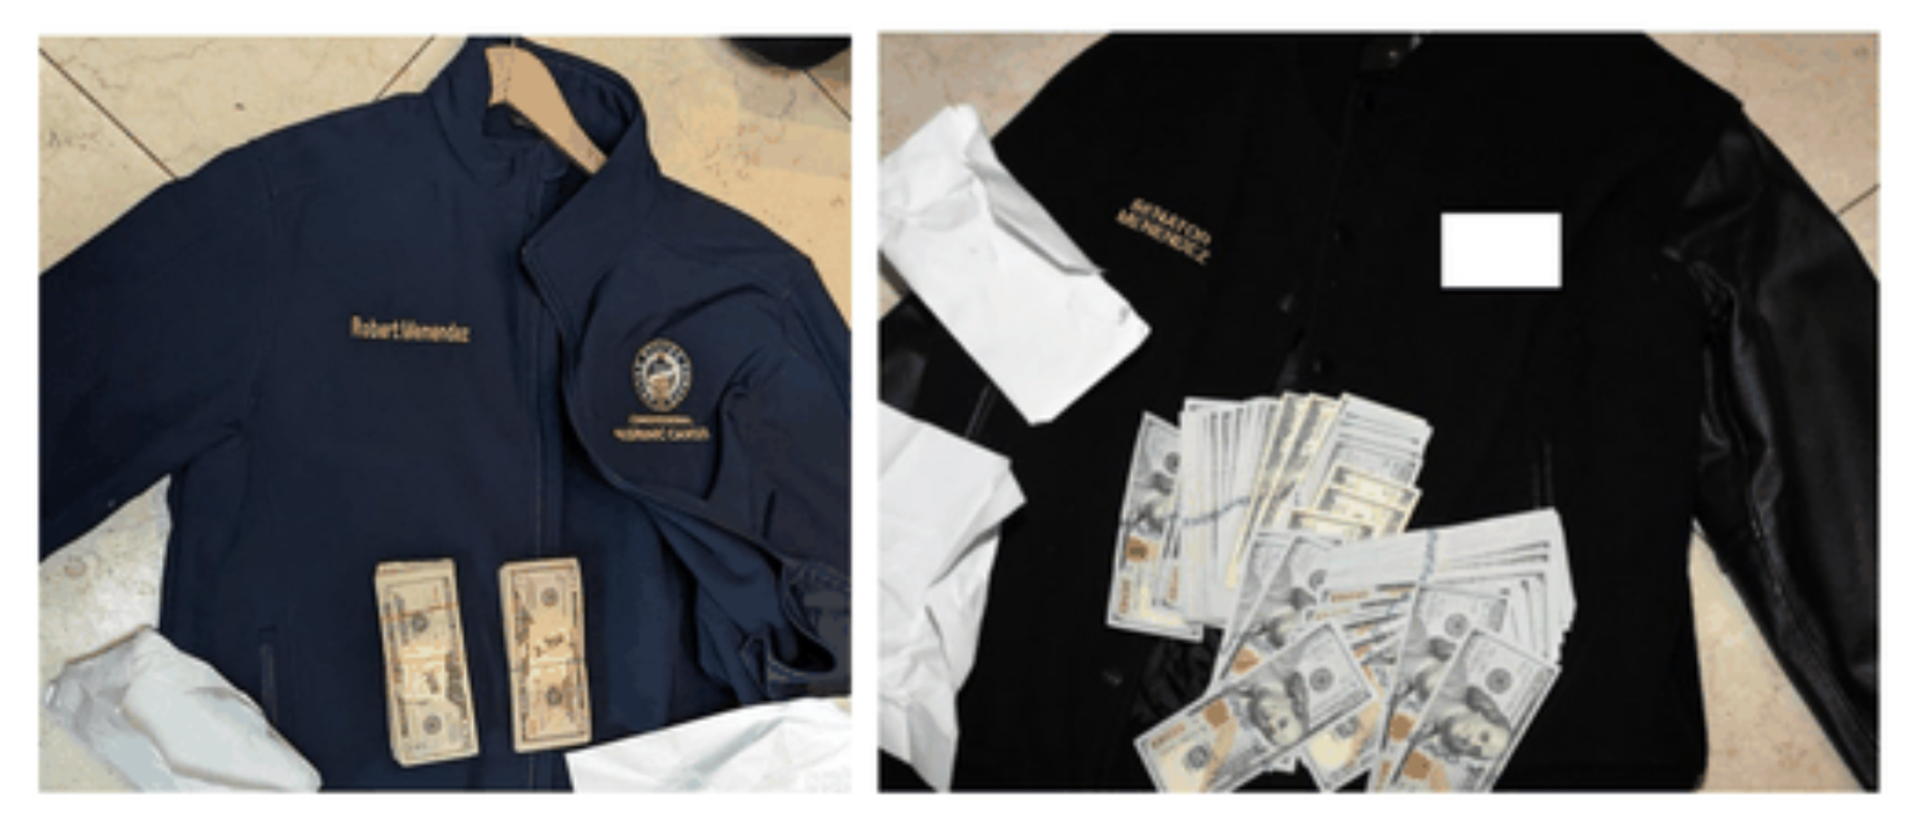 The jackets showing the cash allegedly found at Menendez's home.